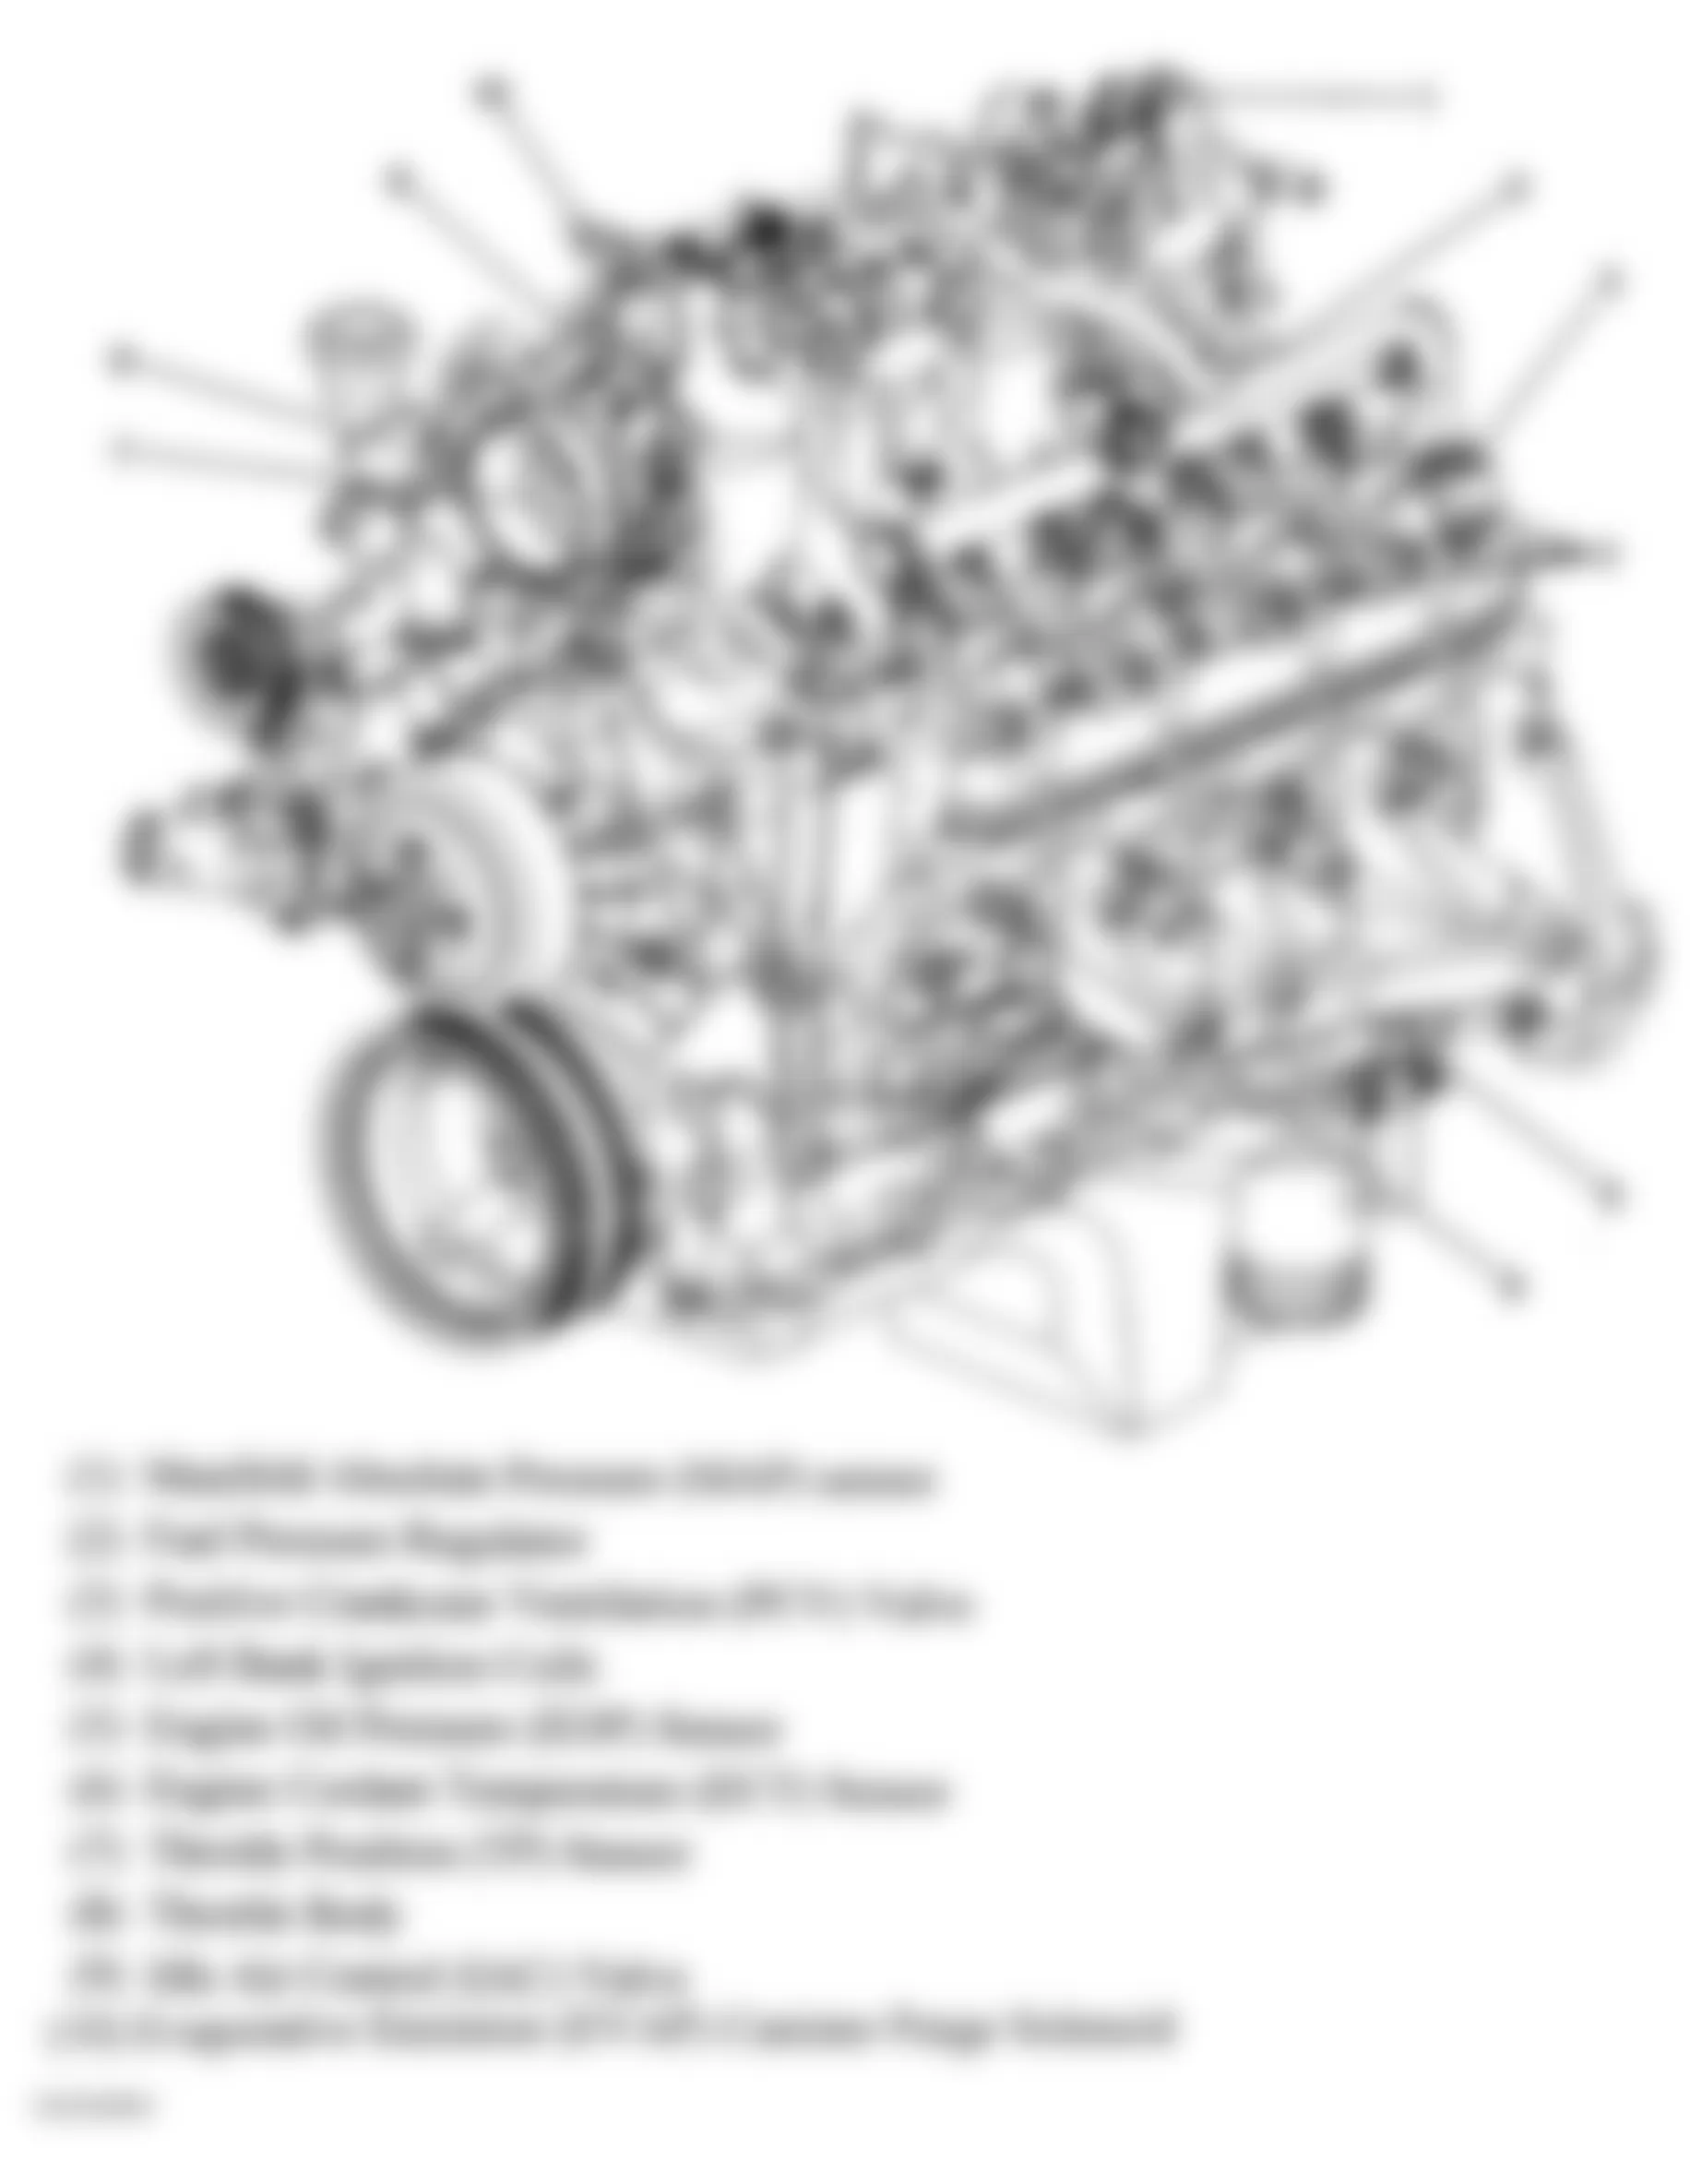 GMC Sierra 1500 HD 2005 - Component Locations -  Left Front Of Engine (4.8L, 5.3L & 6.0L)